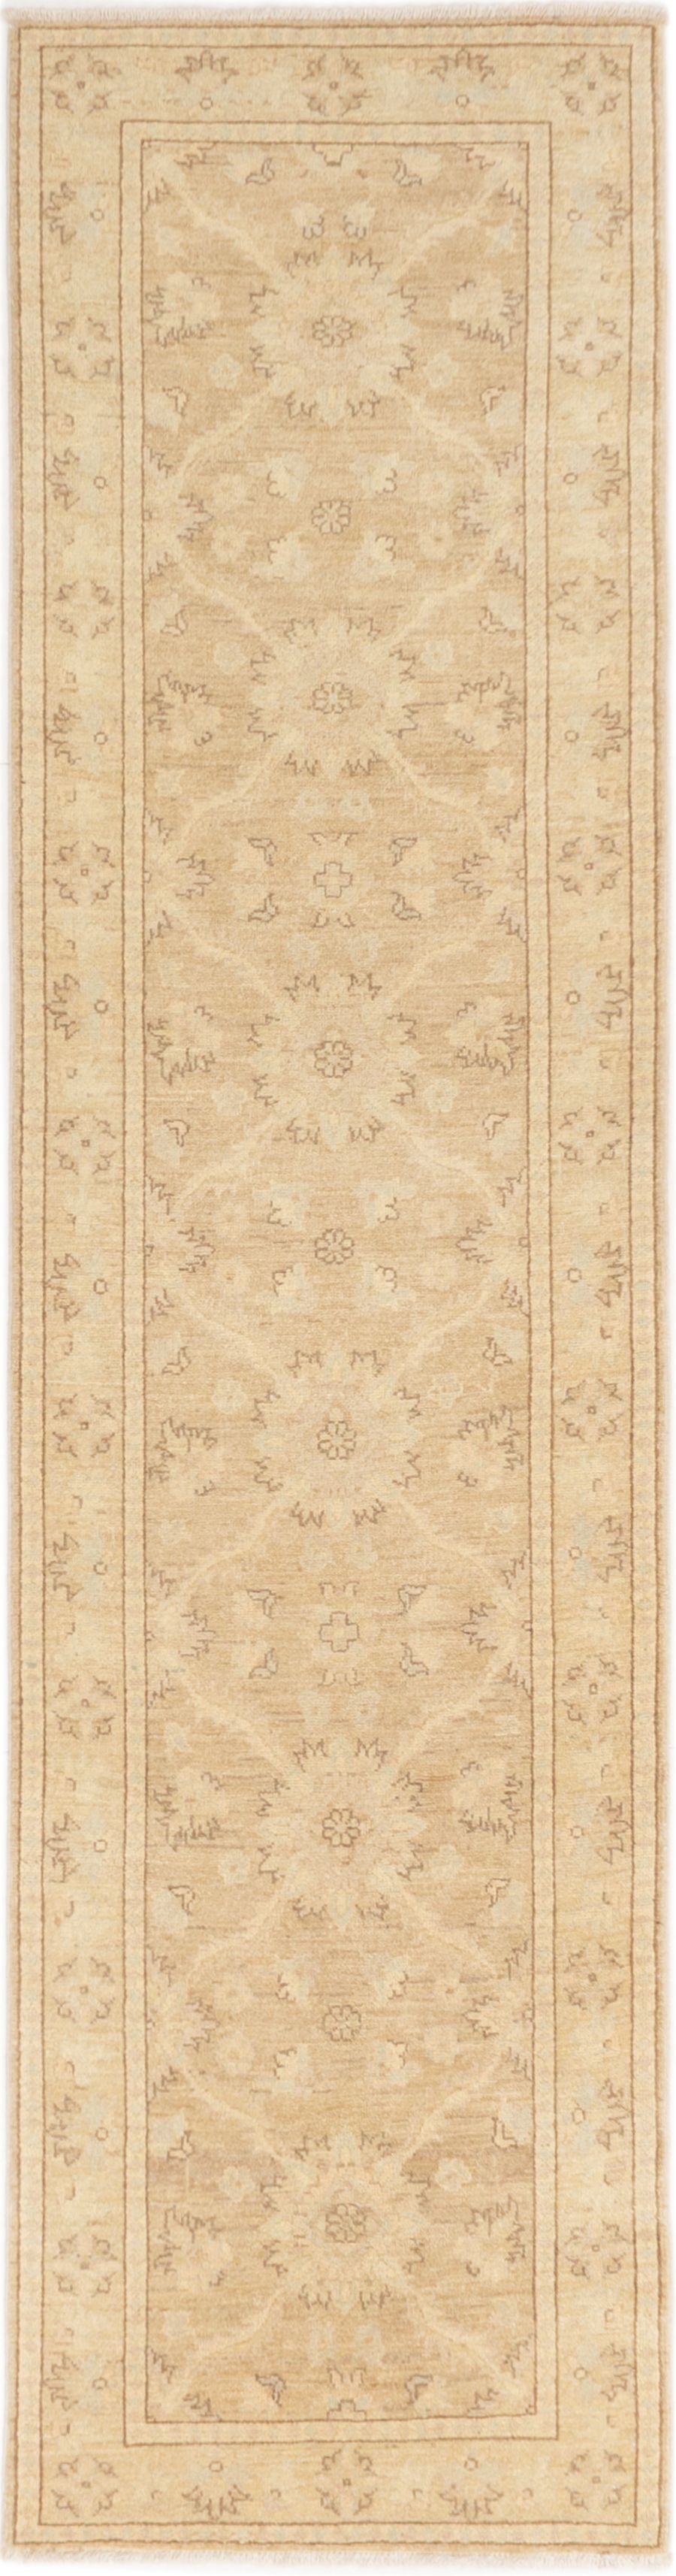 Hand-knotted Chobi Finest Beige Wool Rug 2'7" x 10'2" Size: 2'7" x 10'2"  